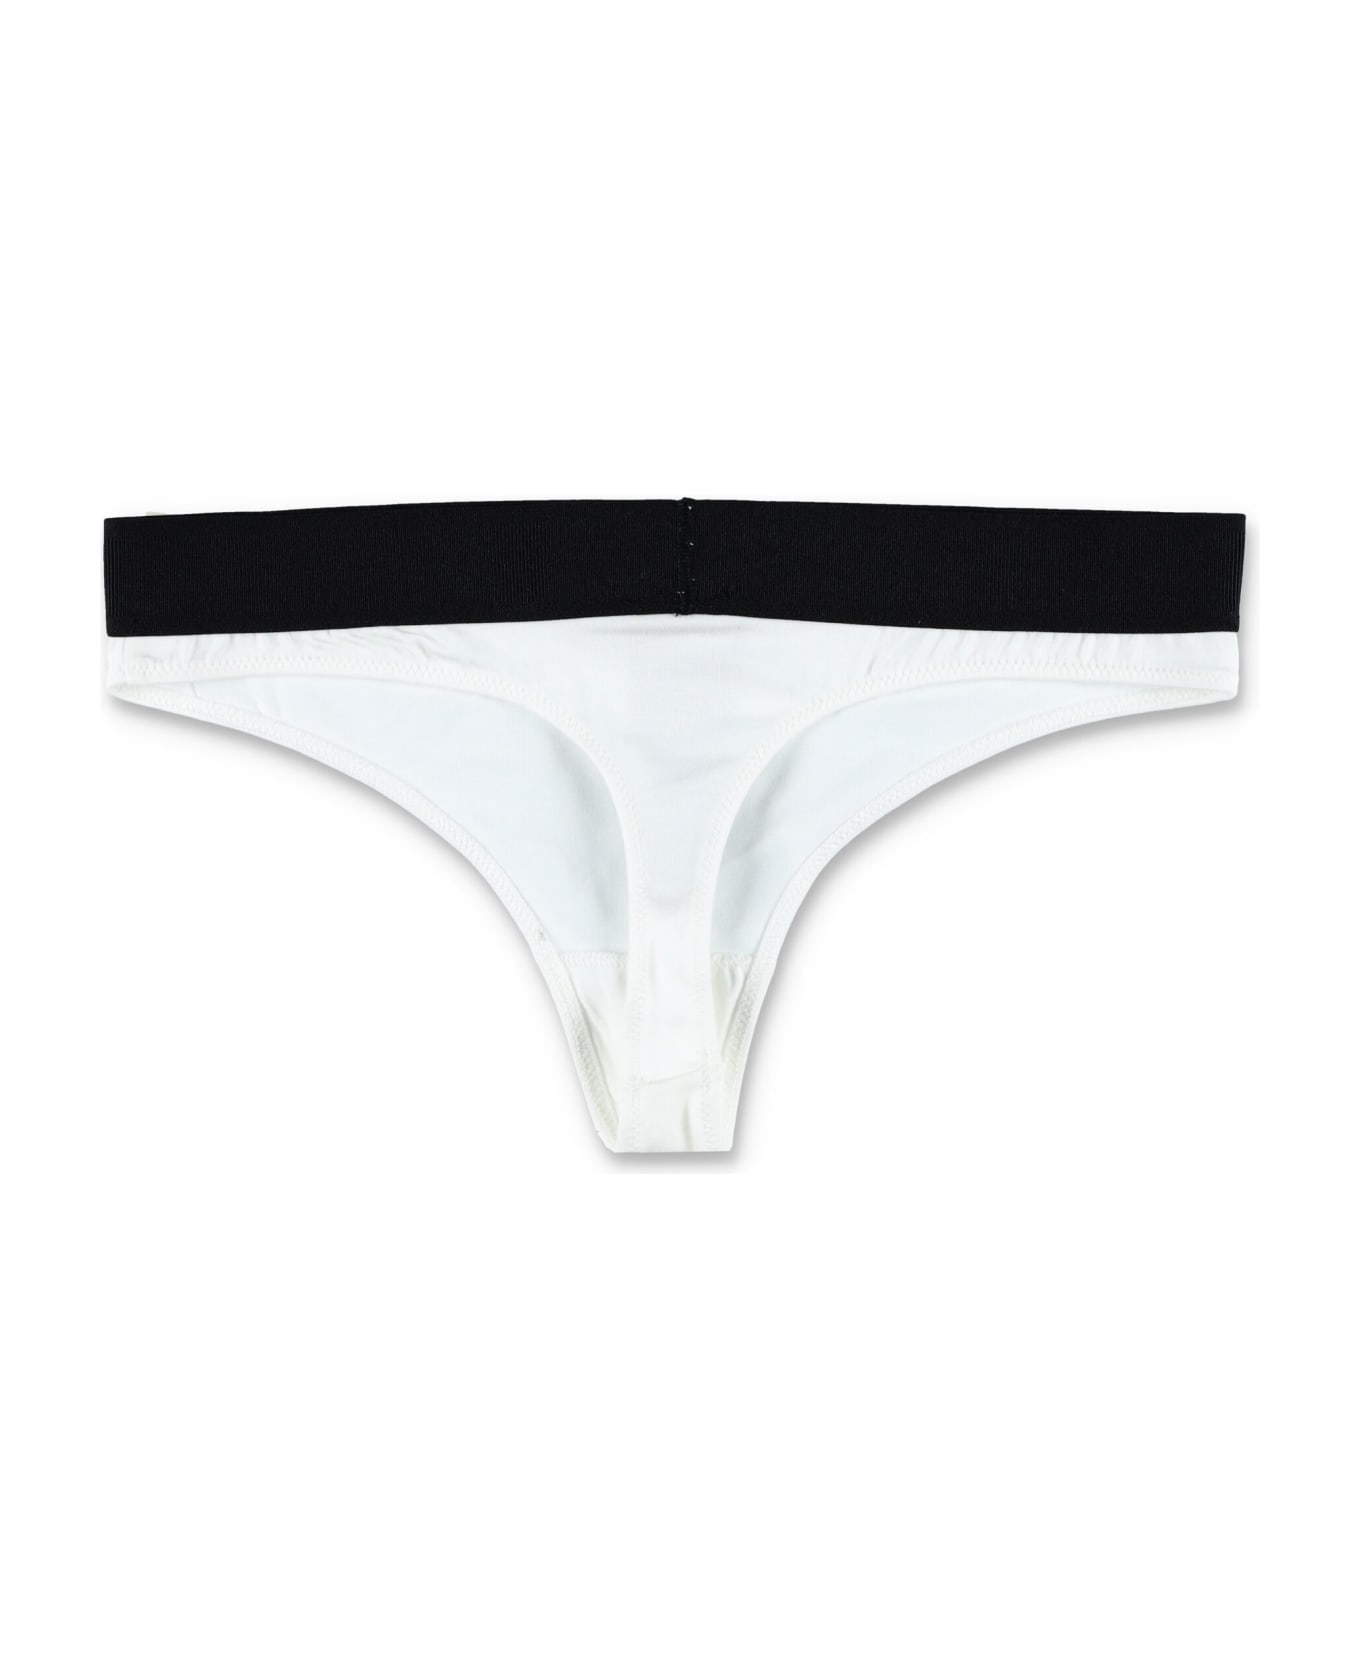 Tom Ford Brief With Logo - WHITE ショーツ